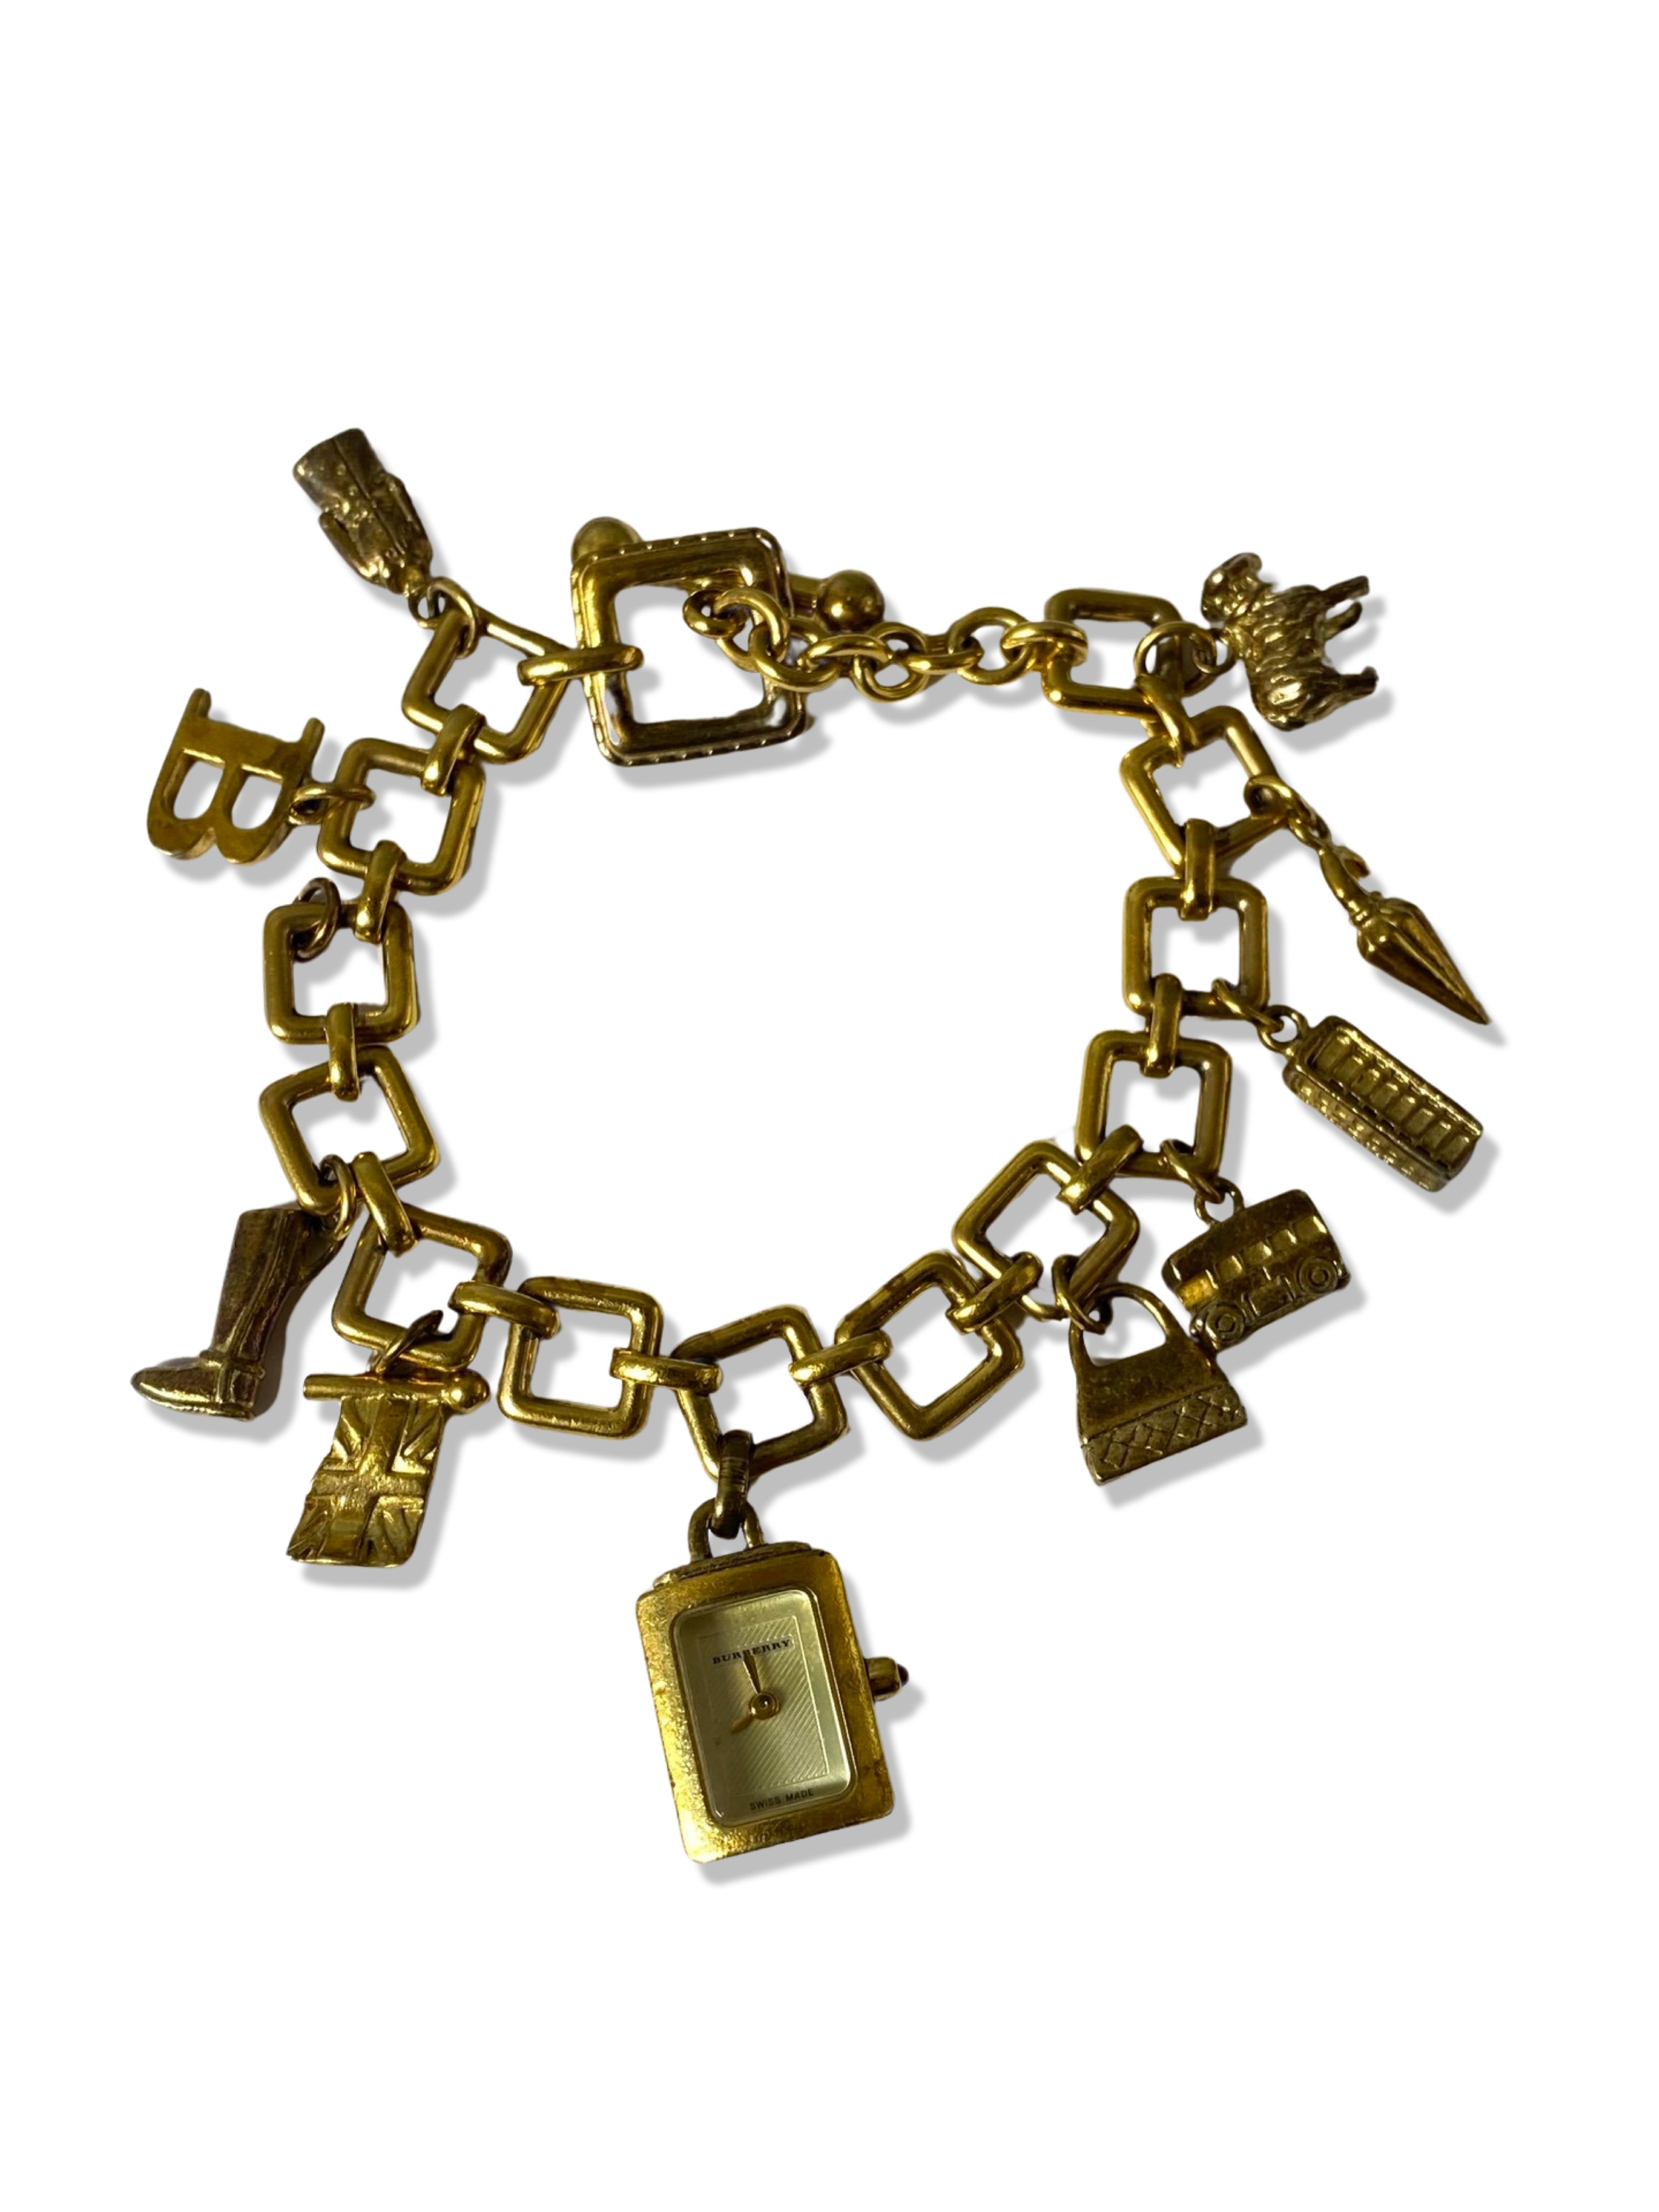 Burberry silver gold tone charm bracelet which includes a working watch charm, weighing 63.03